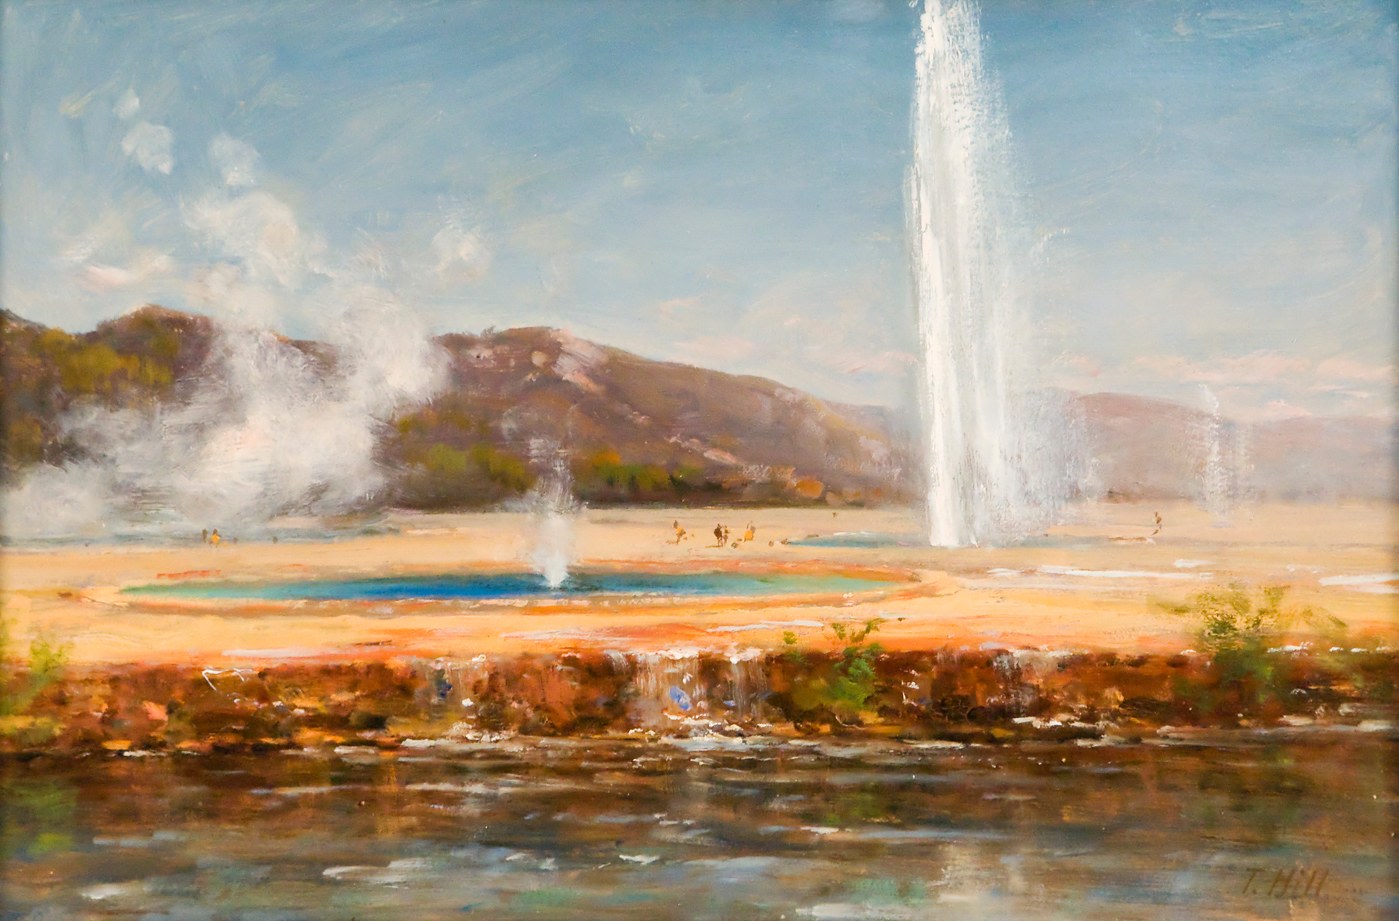 Thomas Hill, Yellowstone Geysers, National Parks, Yellowstone National Park, western art